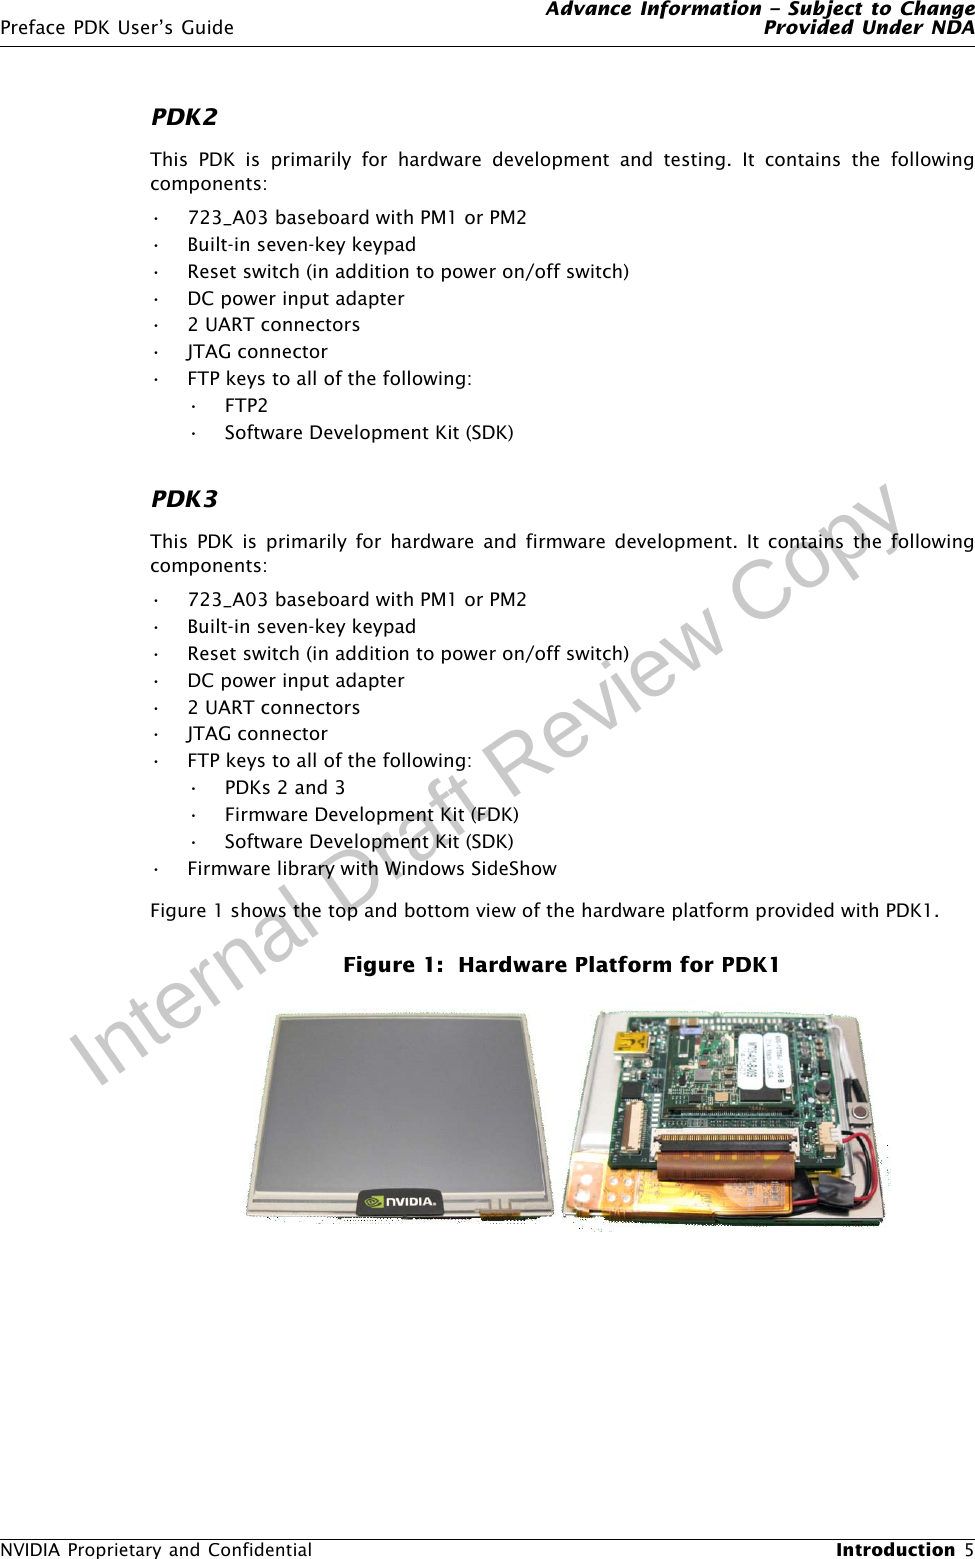 Advance Information – Subject to ChangePreface PDK User’s Guide Provided Under NDANVIDIA Proprietary and Confidential  Introduction 5Internal Draft Review CopyPDK2This PDK is primarily for hardware development and testing. It contains the followingcomponents:• 723_A03 baseboard with PM1 or PM2• Built-in seven-key keypad• Reset switch (in addition to power on/off switch)• DC power input adapter• 2 UART connectors• JTAG connector• FTP keys to all of the following:•FTP2• Software Development Kit (SDK)PDK3This PDK is primarily for hardware and firmware development. It contains the followingcomponents:• 723_A03 baseboard with PM1 or PM2• Built-in seven-key keypad• Reset switch (in addition to power on/off switch)• DC power input adapter• 2 UART connectors• JTAG connector• FTP keys to all of the following:•PDKs 2 and 3• Firmware Development Kit (FDK)• Software Development Kit (SDK)• Firmware library with Windows SideShowFigure 1 shows the top and bottom view of the hardware platform provided with PDK1. Figure 1:  Hardware Platform for PDK1